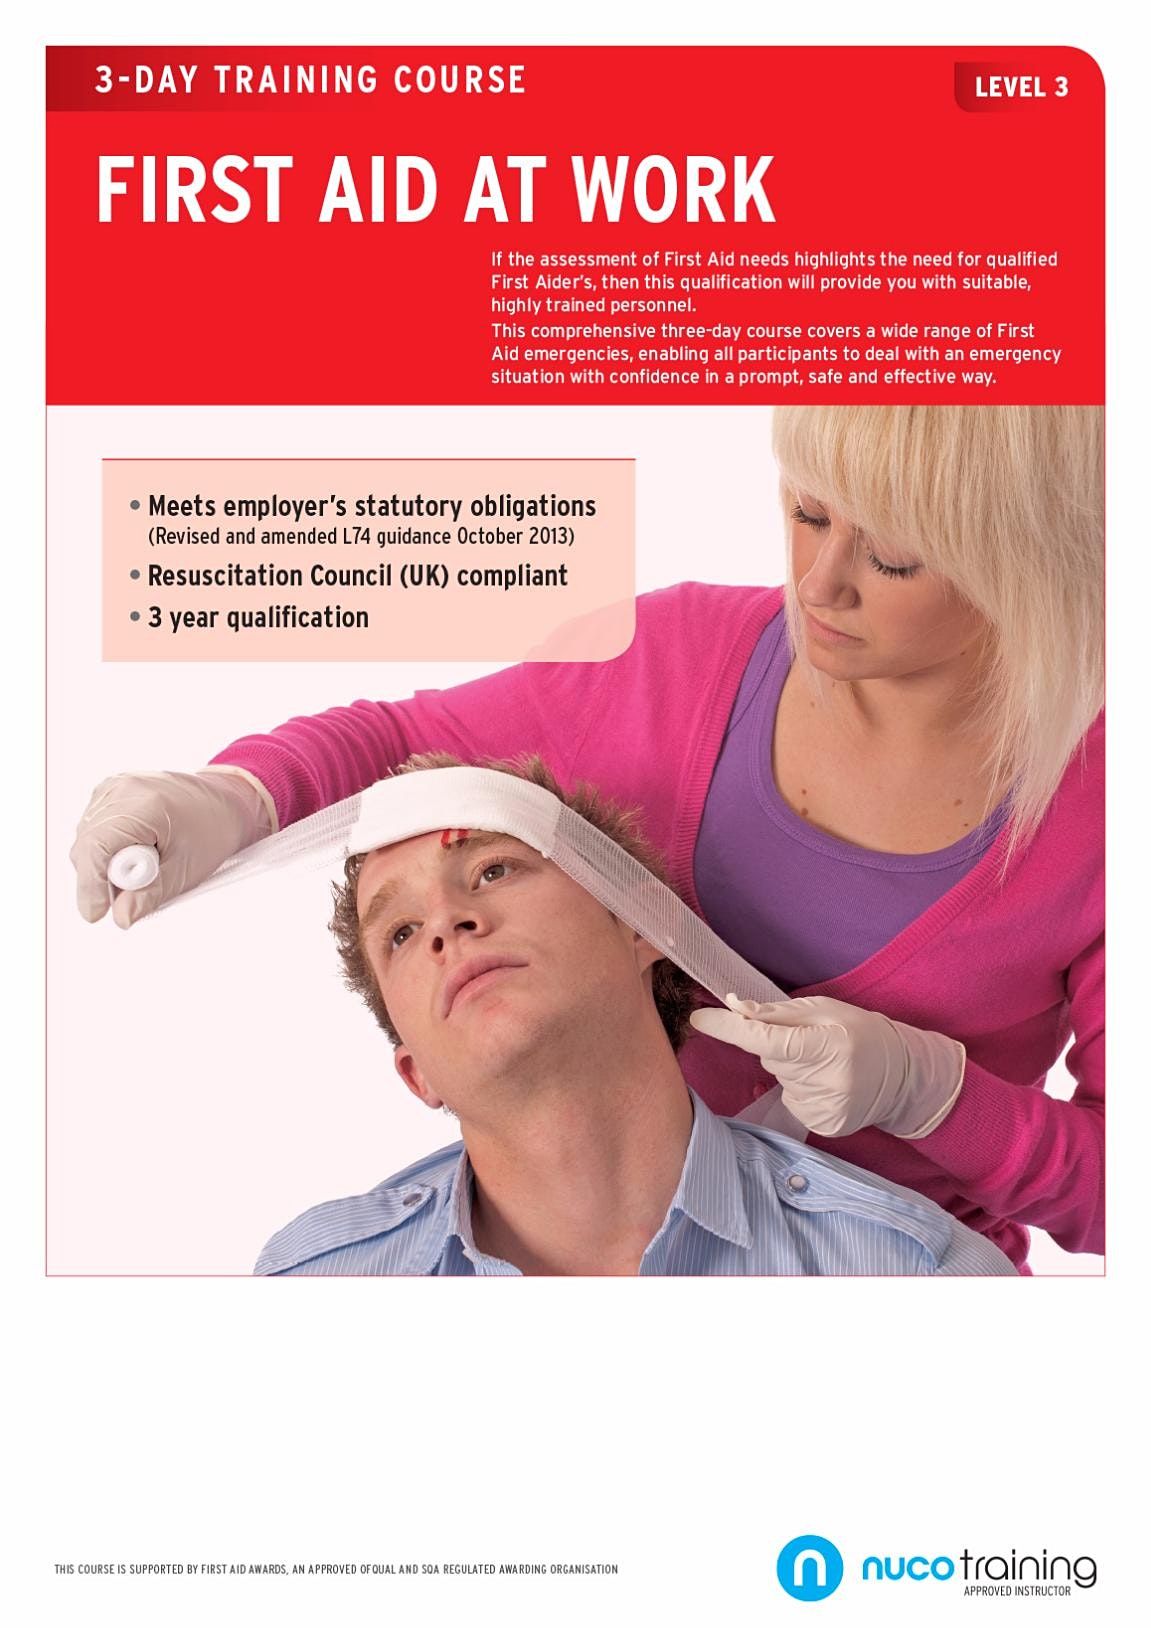 Level 3 First Aid at Work Course Re qualification